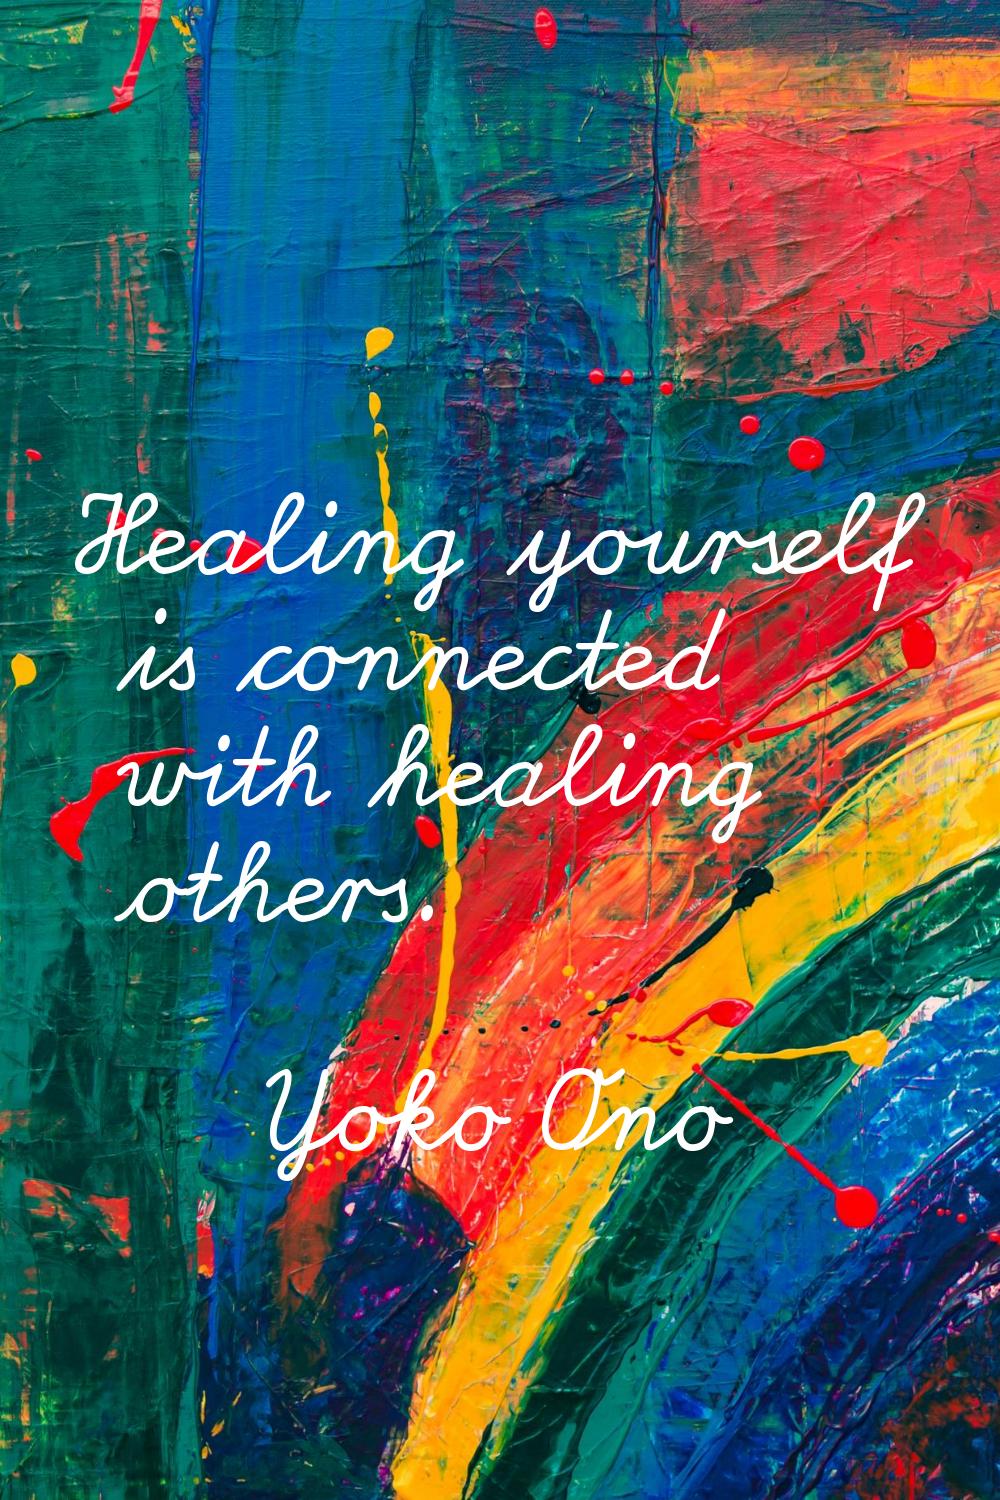 Healing yourself is connected with healing others.